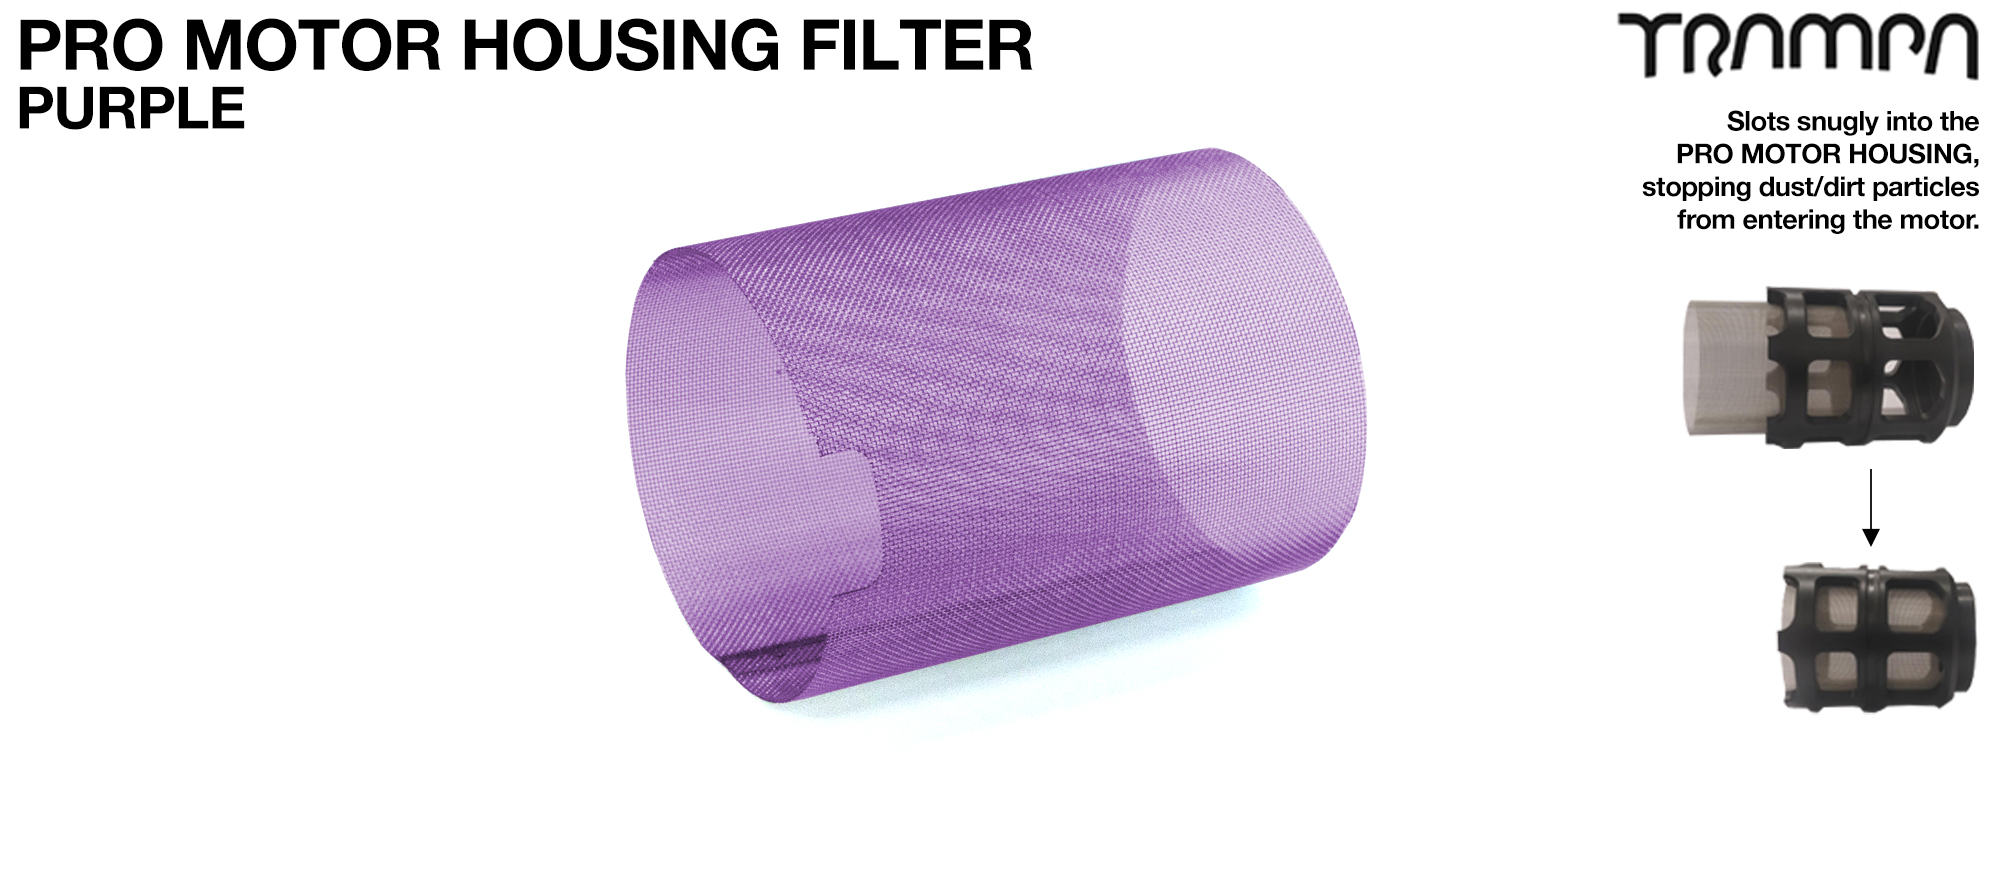 MkII FULL Motor Protection Cover & MESH FILTER - PURPLE